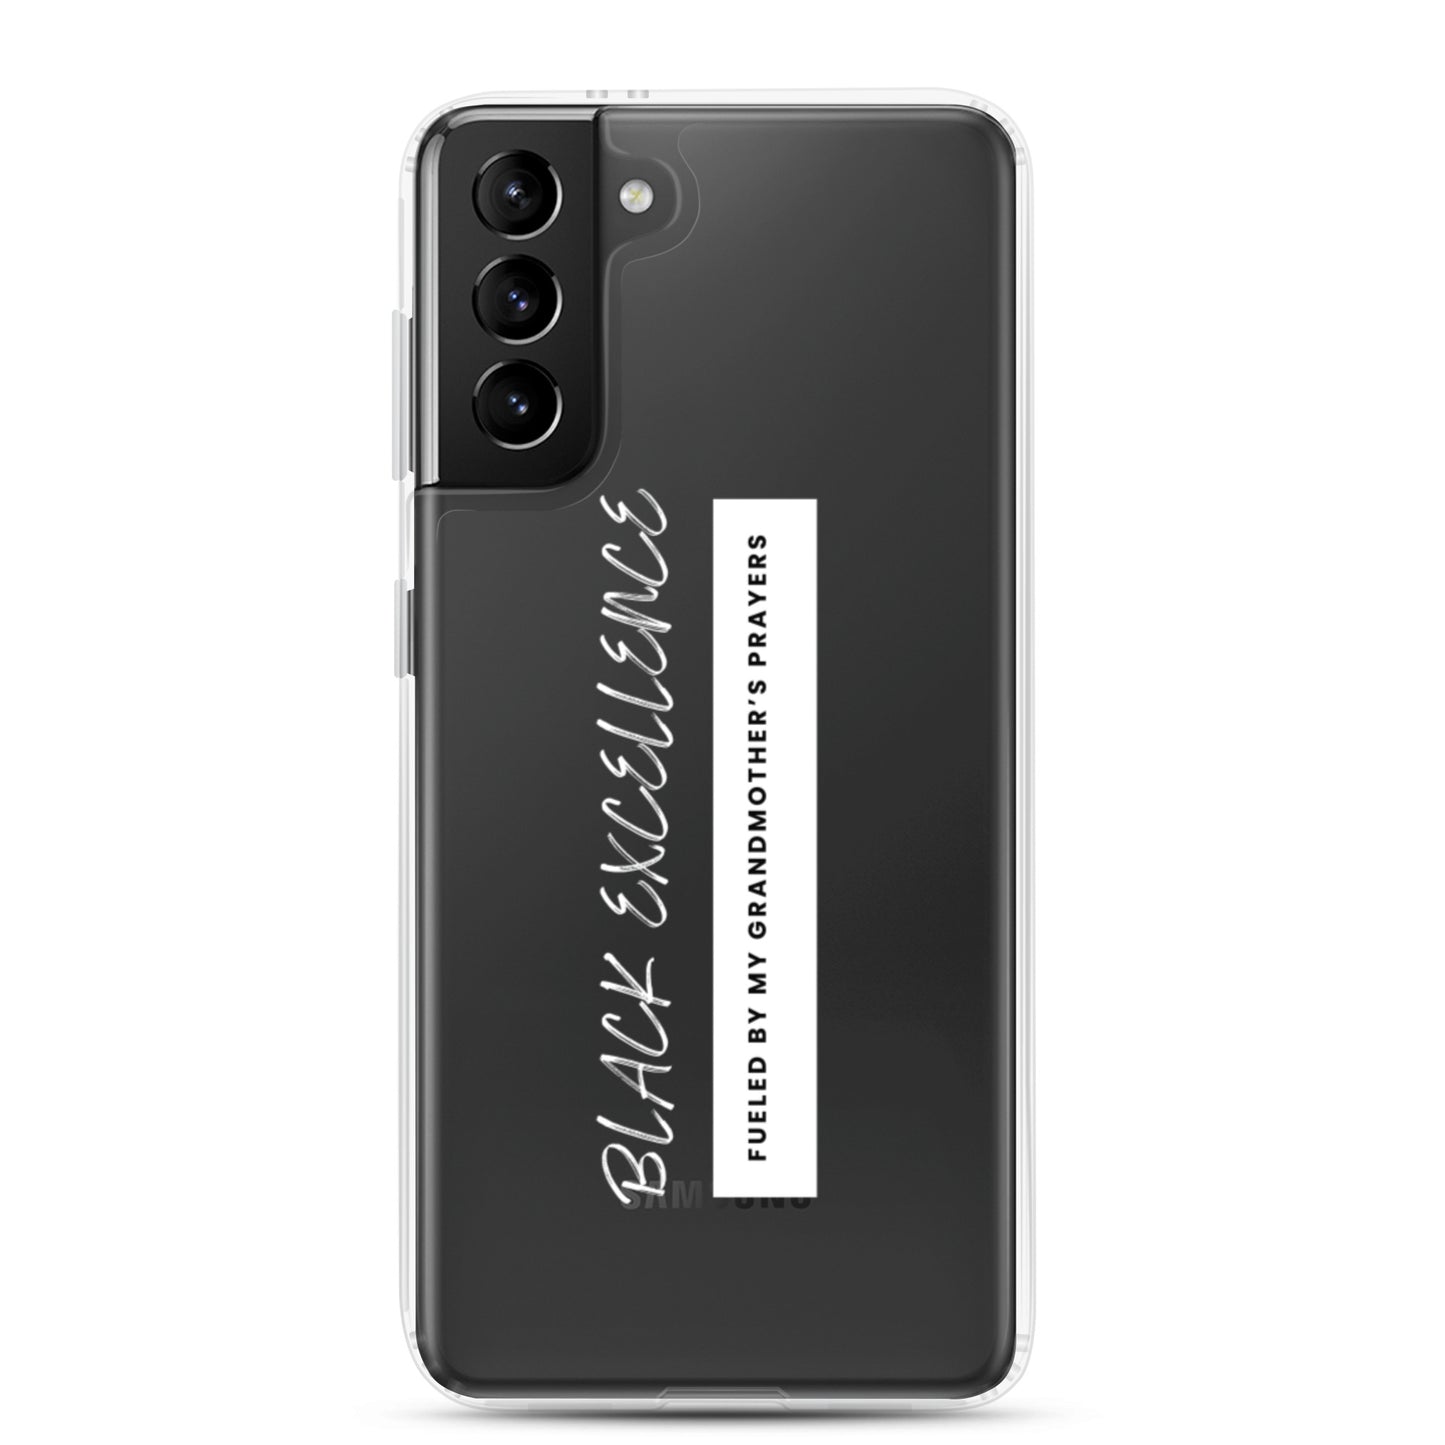 Fueled By My Grandmother's Prayers Samsung Case